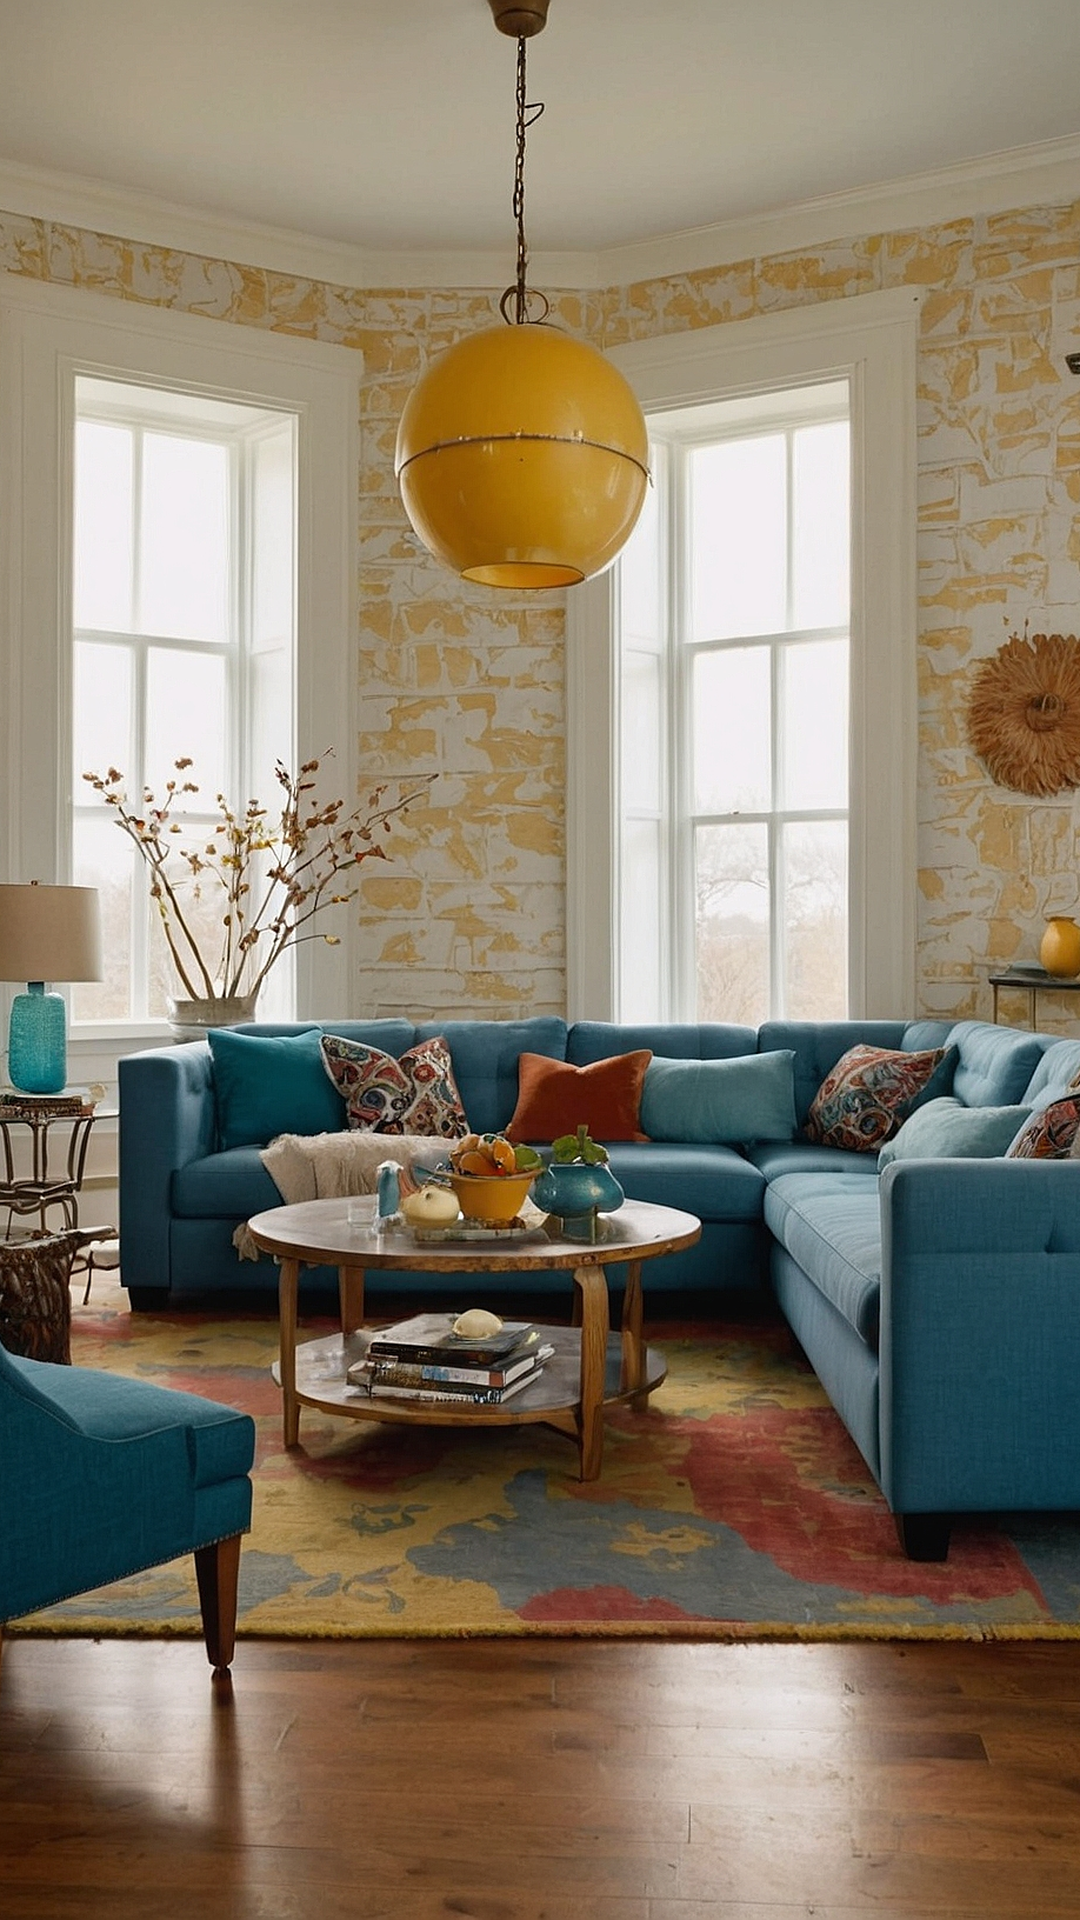 Chic and Cozy: Vibrant Living Room Colors